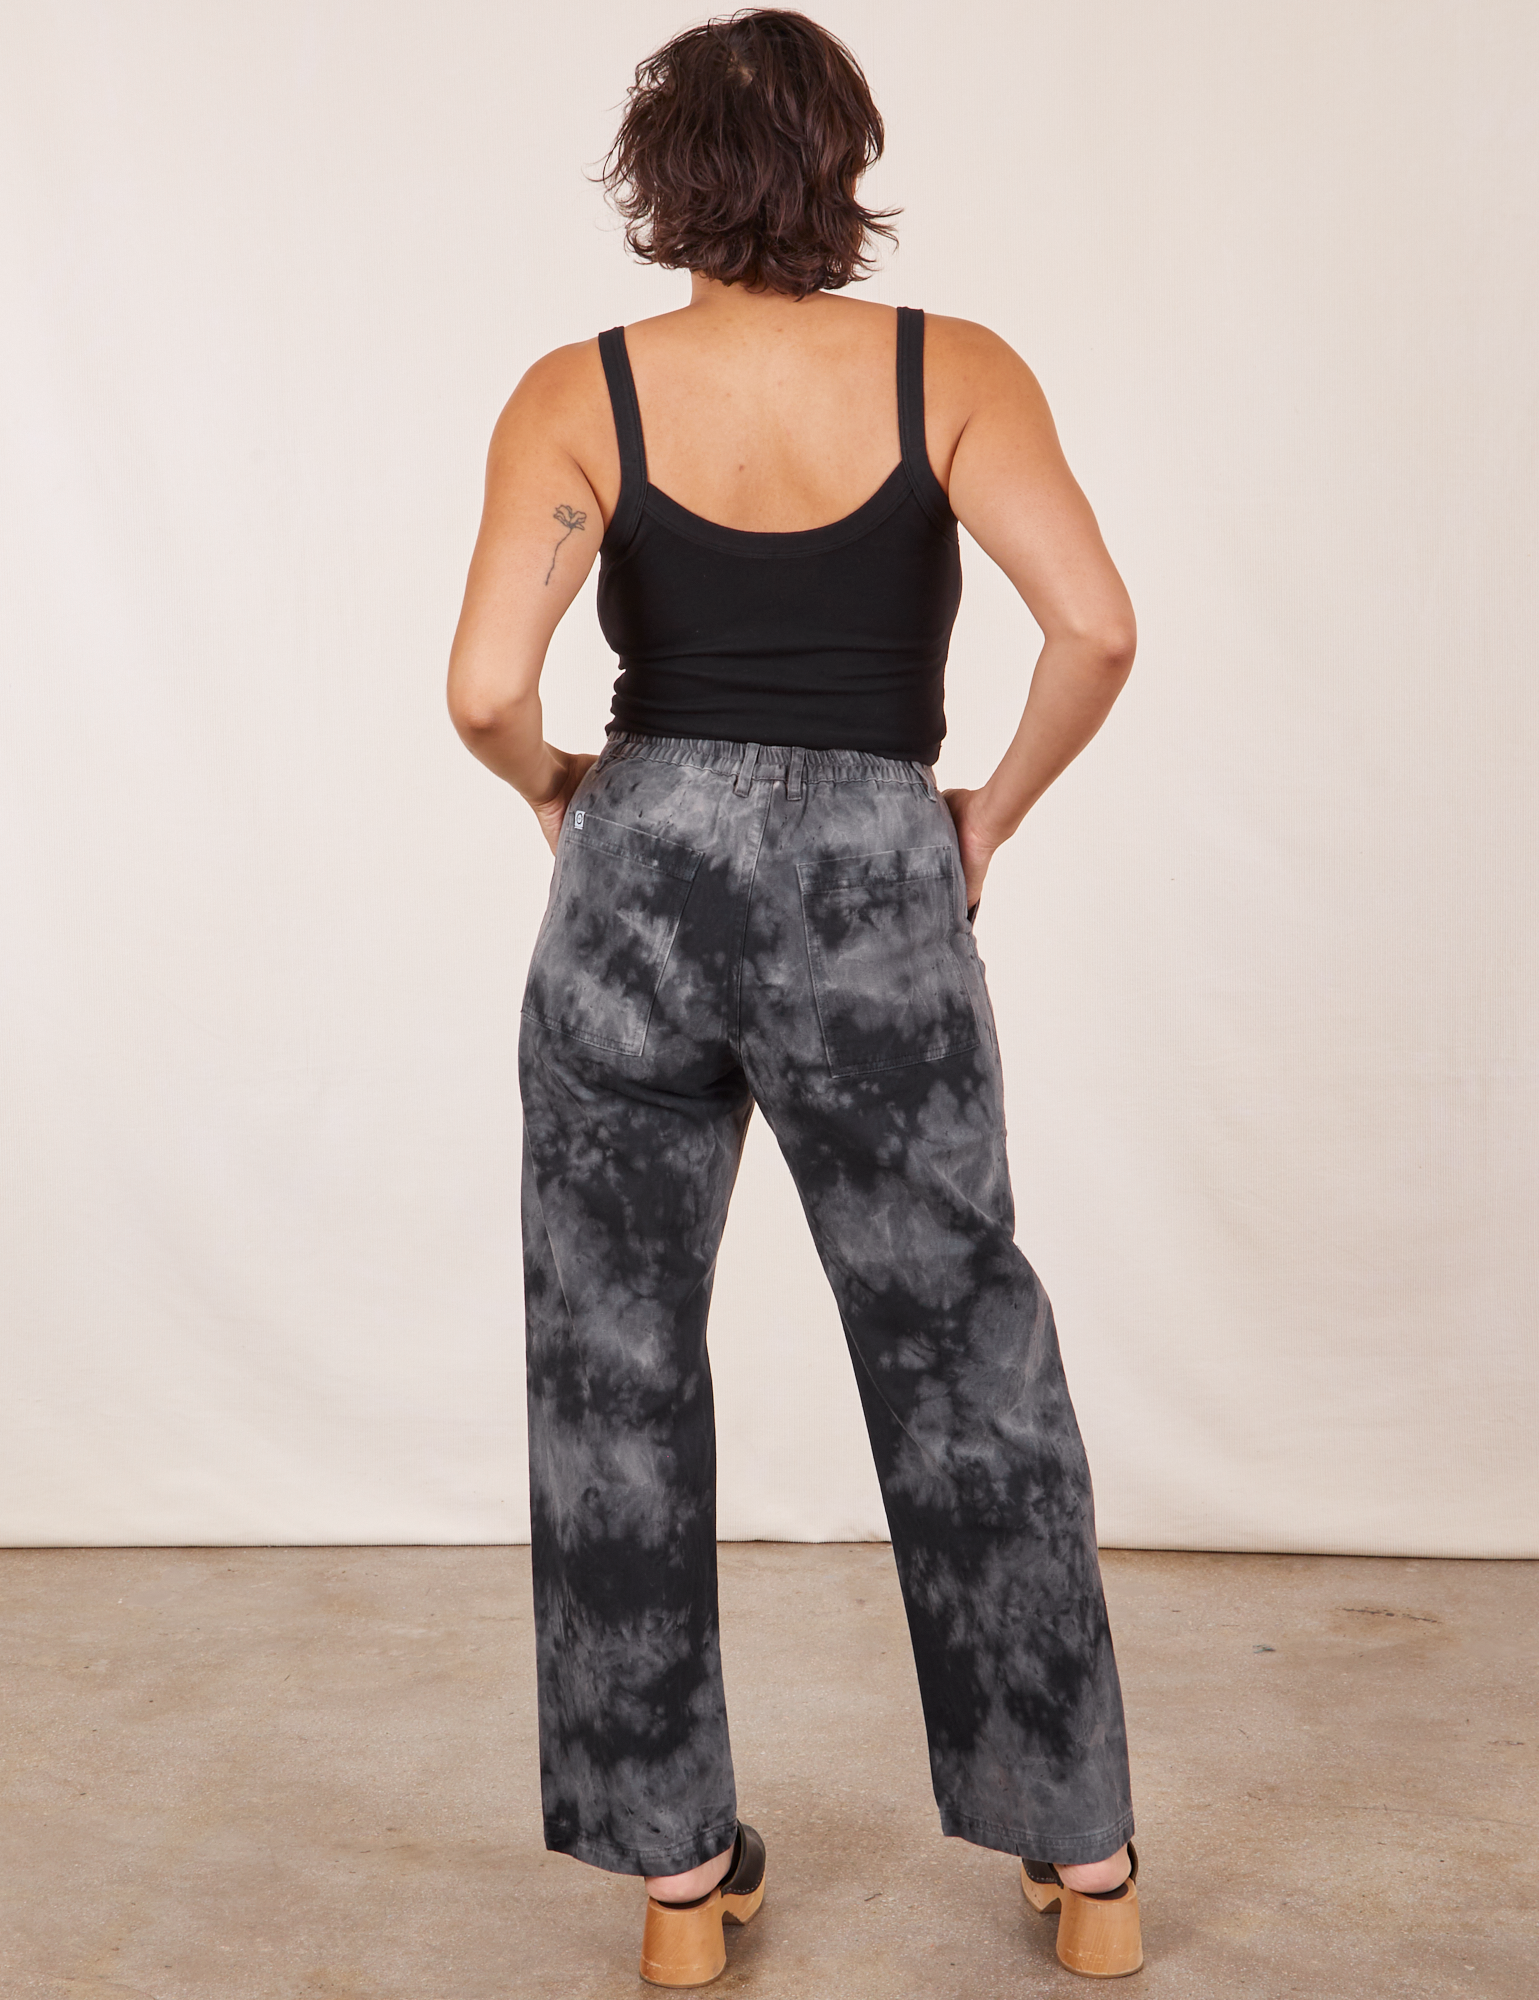 Back view of Black Magic Waters Work Pants and black Cropped Cami worn by Tiara